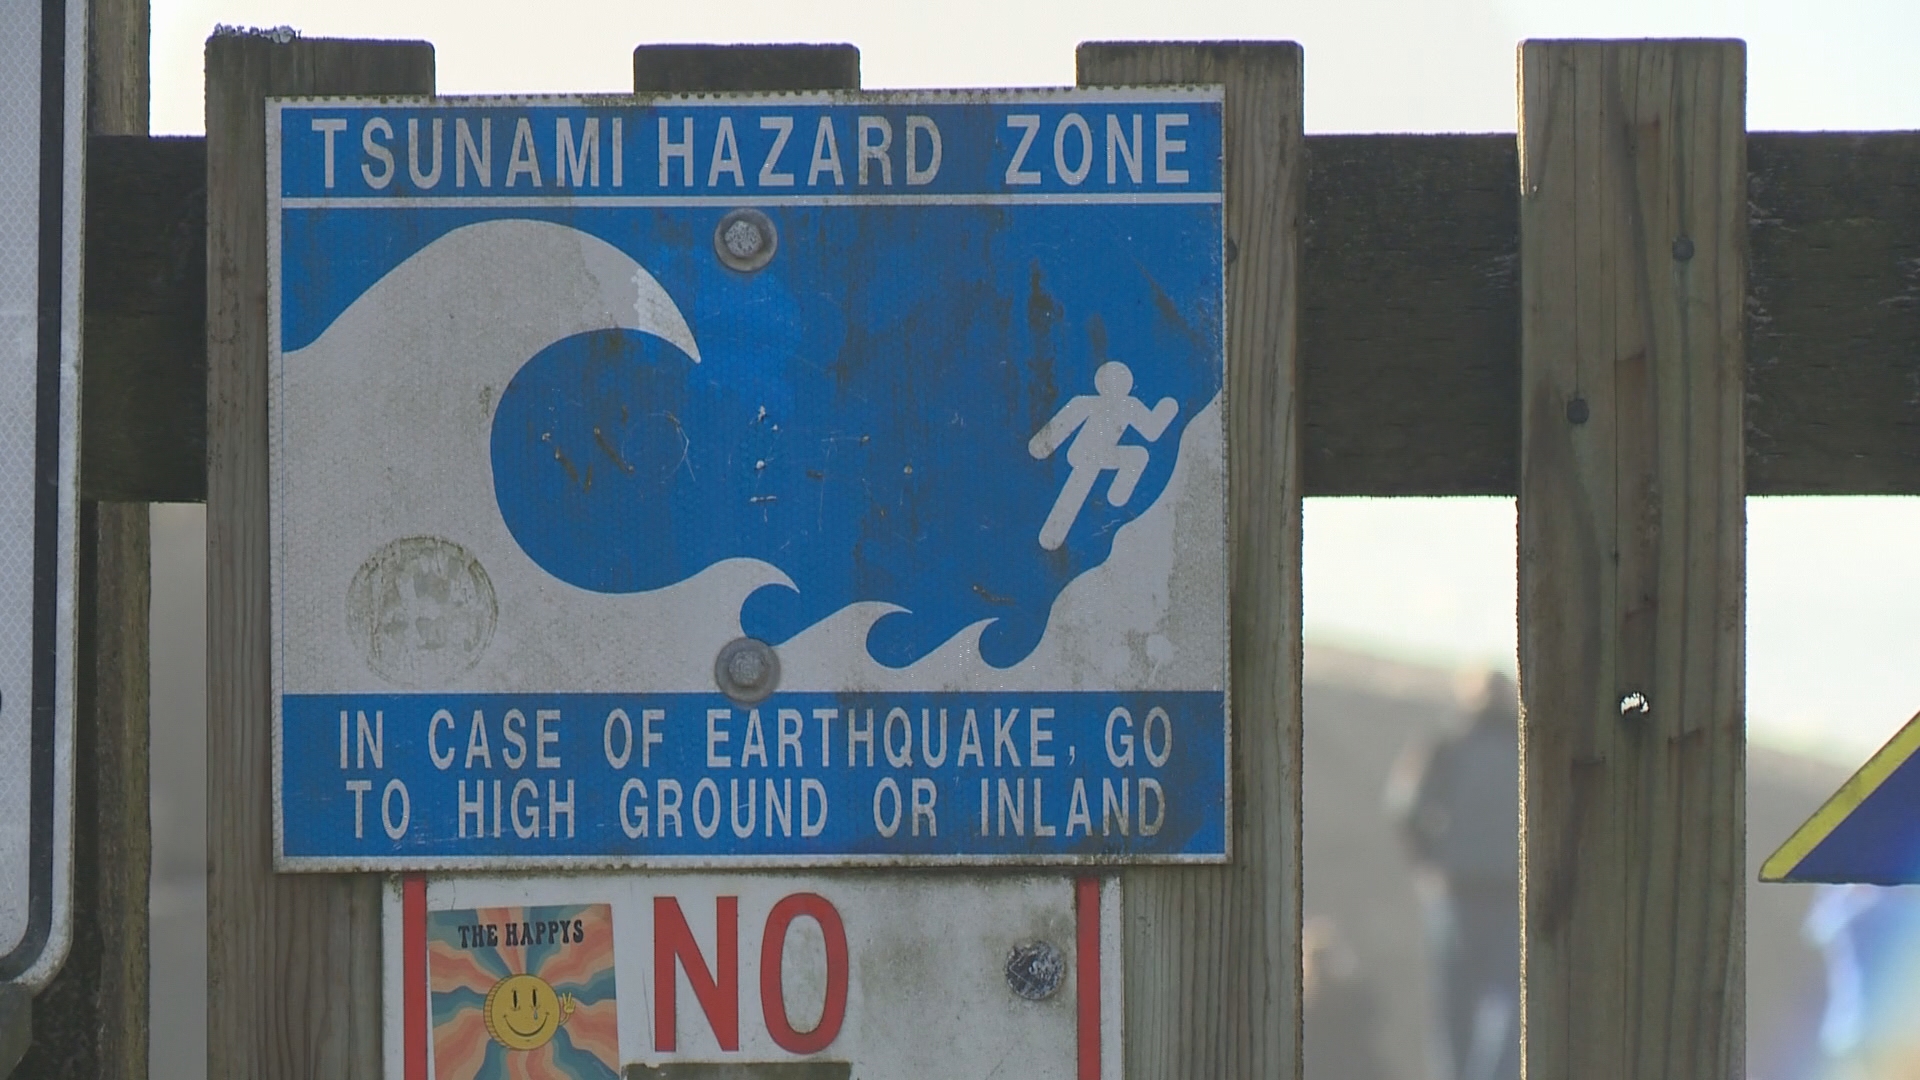 The Cannon Beach Rural Fire Protection District is testing the system through Friday, June 7 as contractors make upgrades.